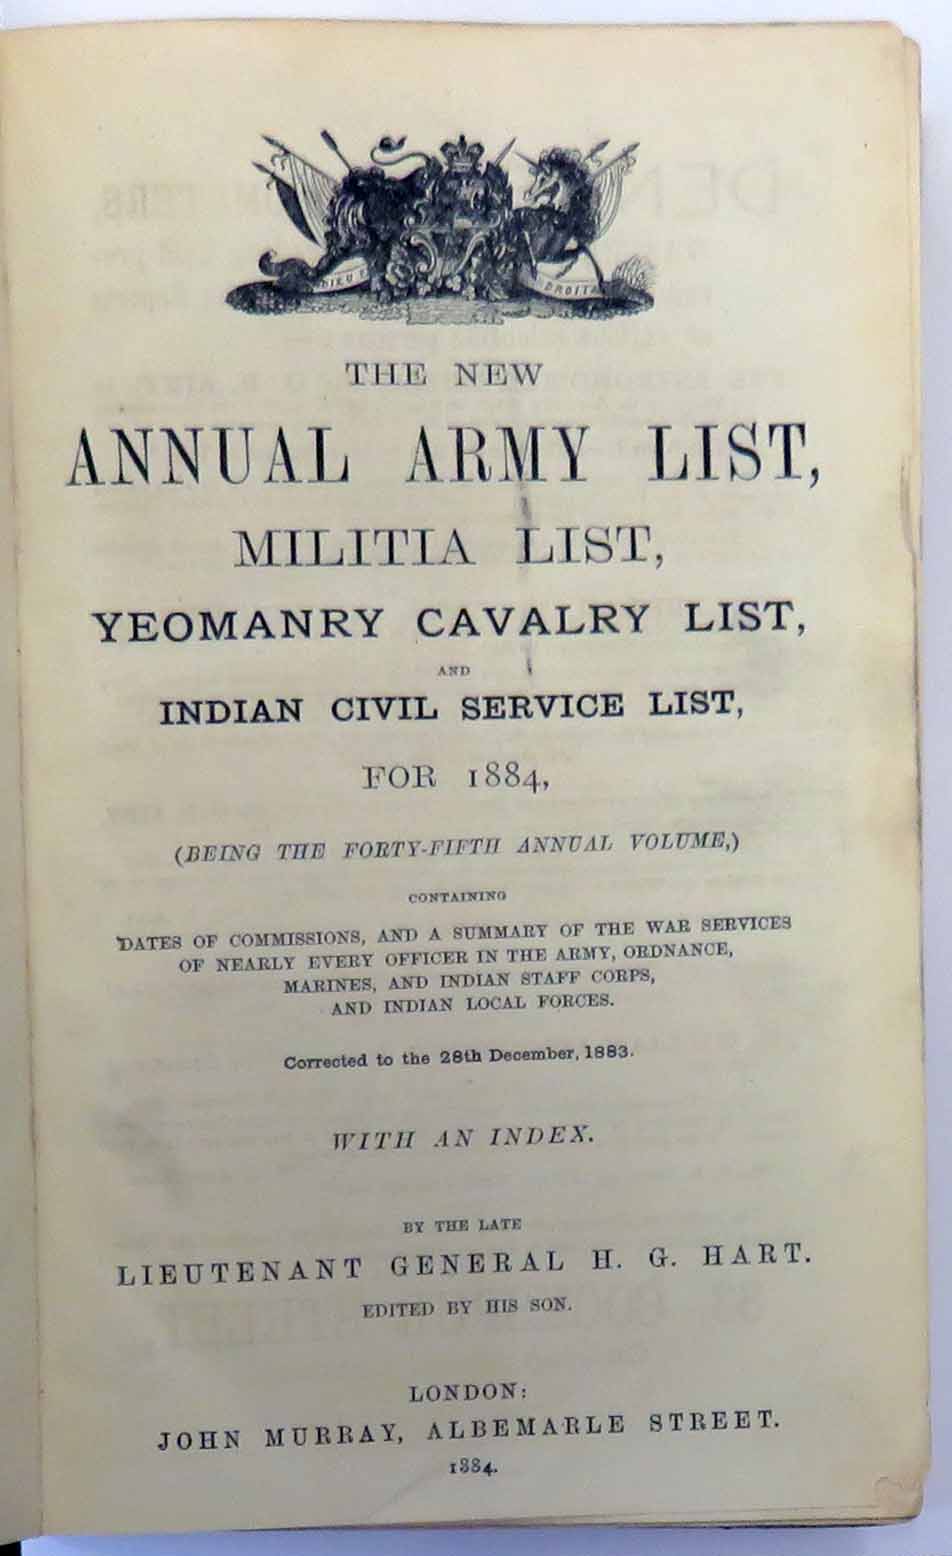 The New Annual Army List, Militia List, Yeomanry Cavalry List, and Indian Civil Service List, For 1884, (Being the Forty-Fifth Annual Volume,)